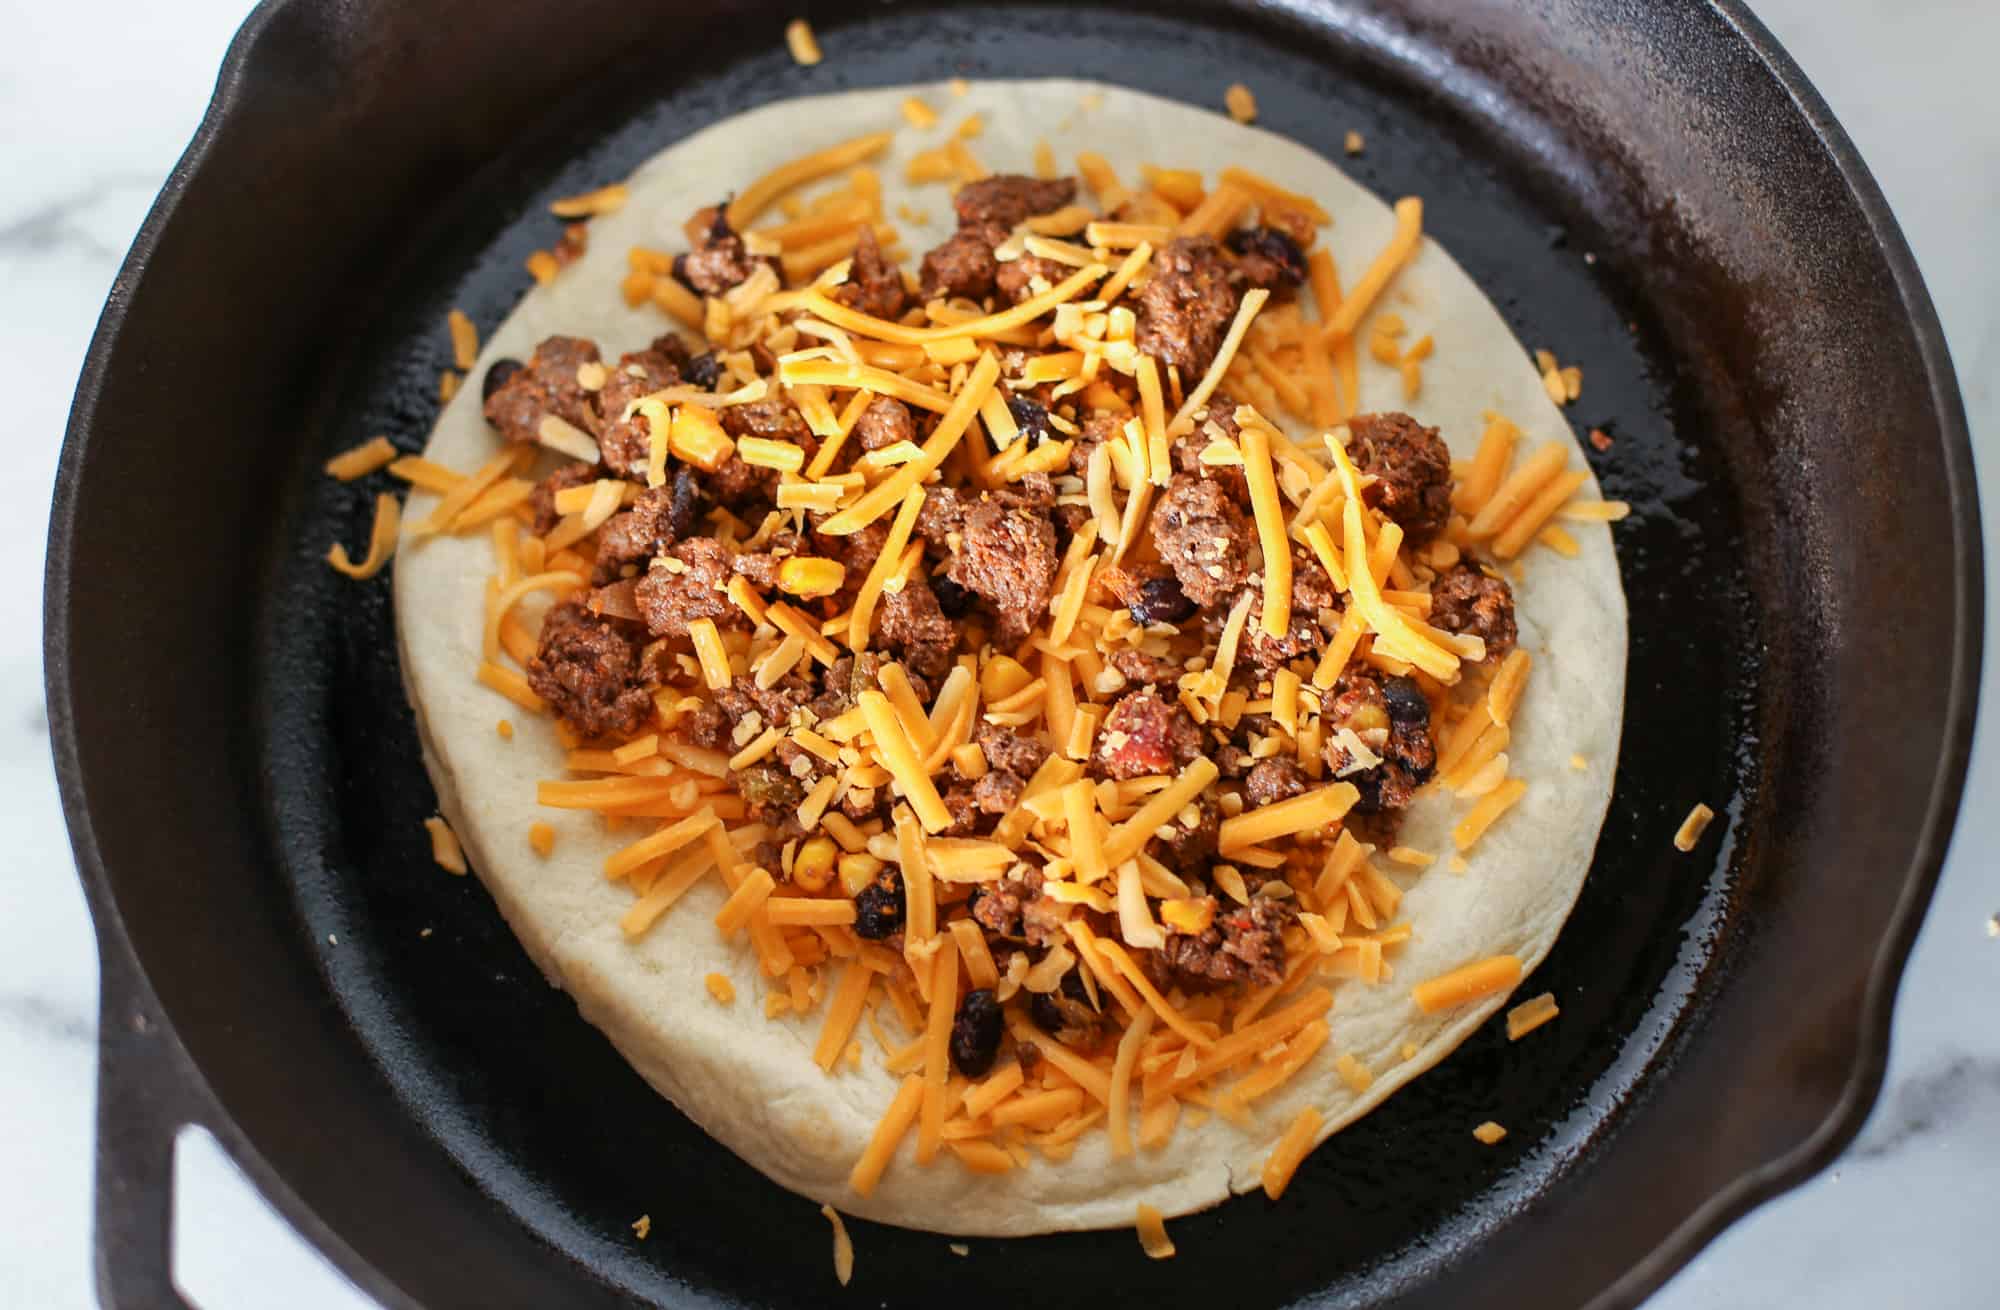 Tortilla with ground beef mixture and shredded cheese in a cast iron skillet.